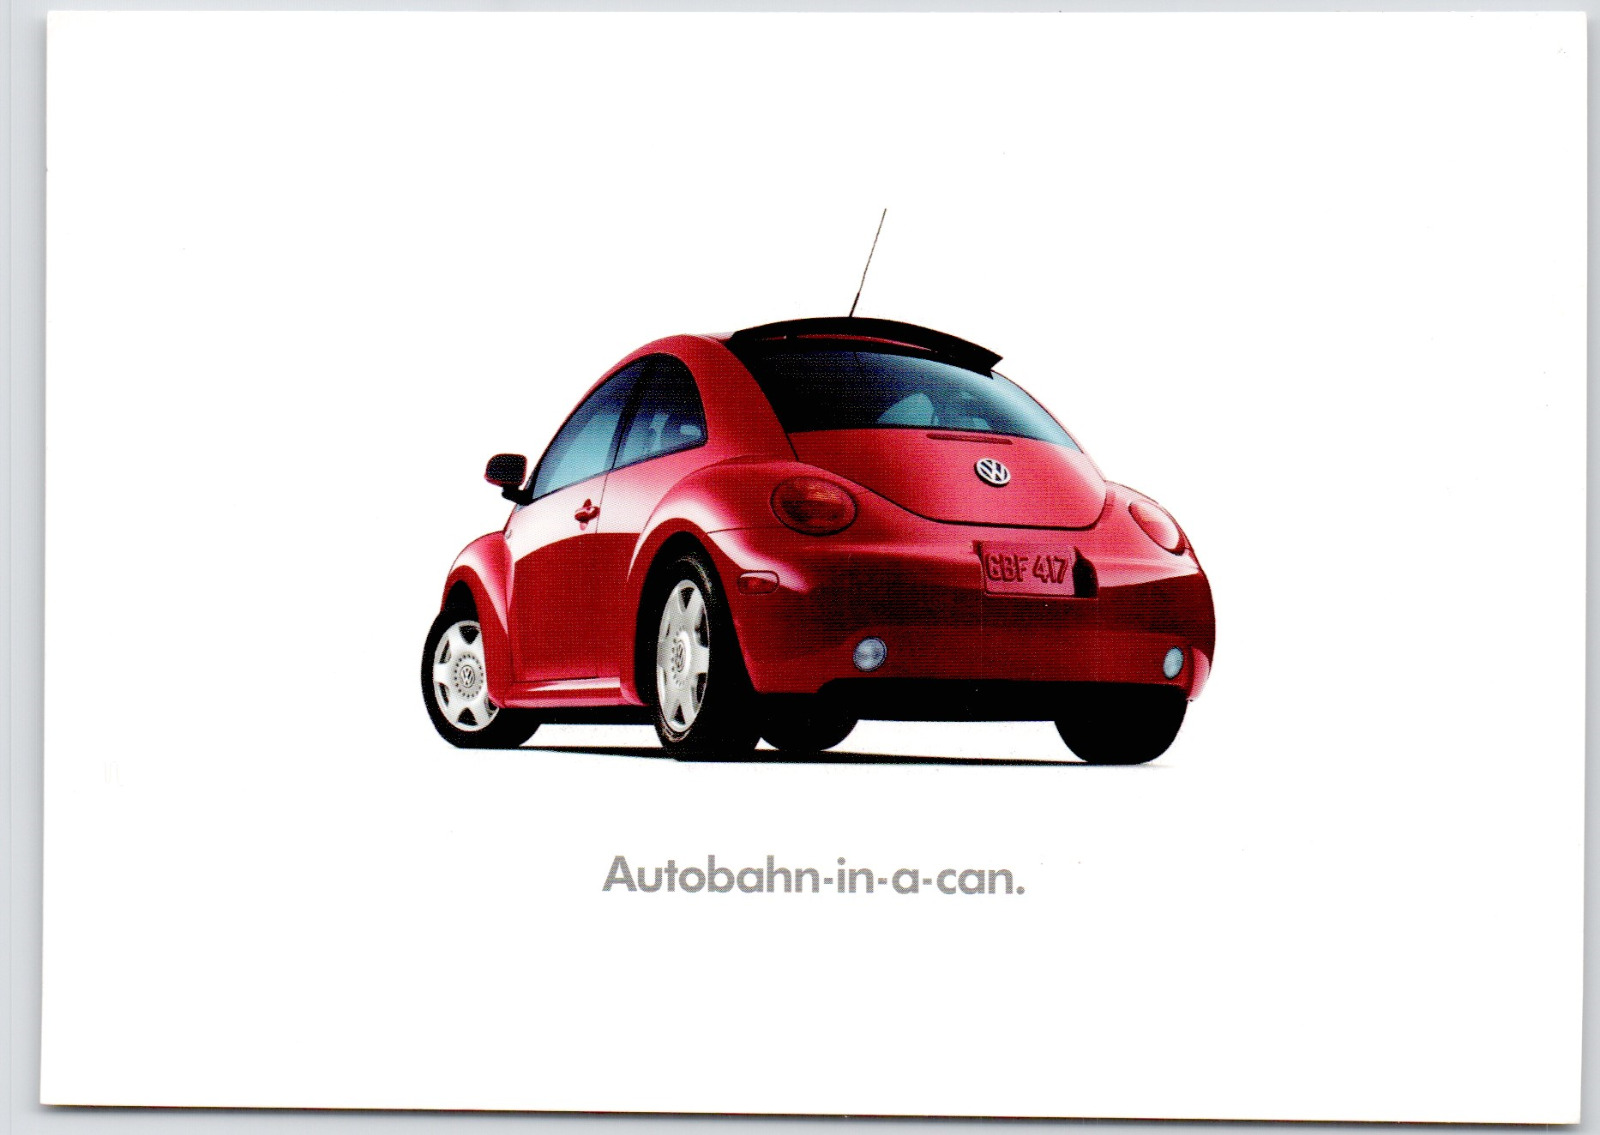 Autobahn In Can Volkswagen Beetle 1999 Car Turbo Drivers Wanted Vintage Postcard